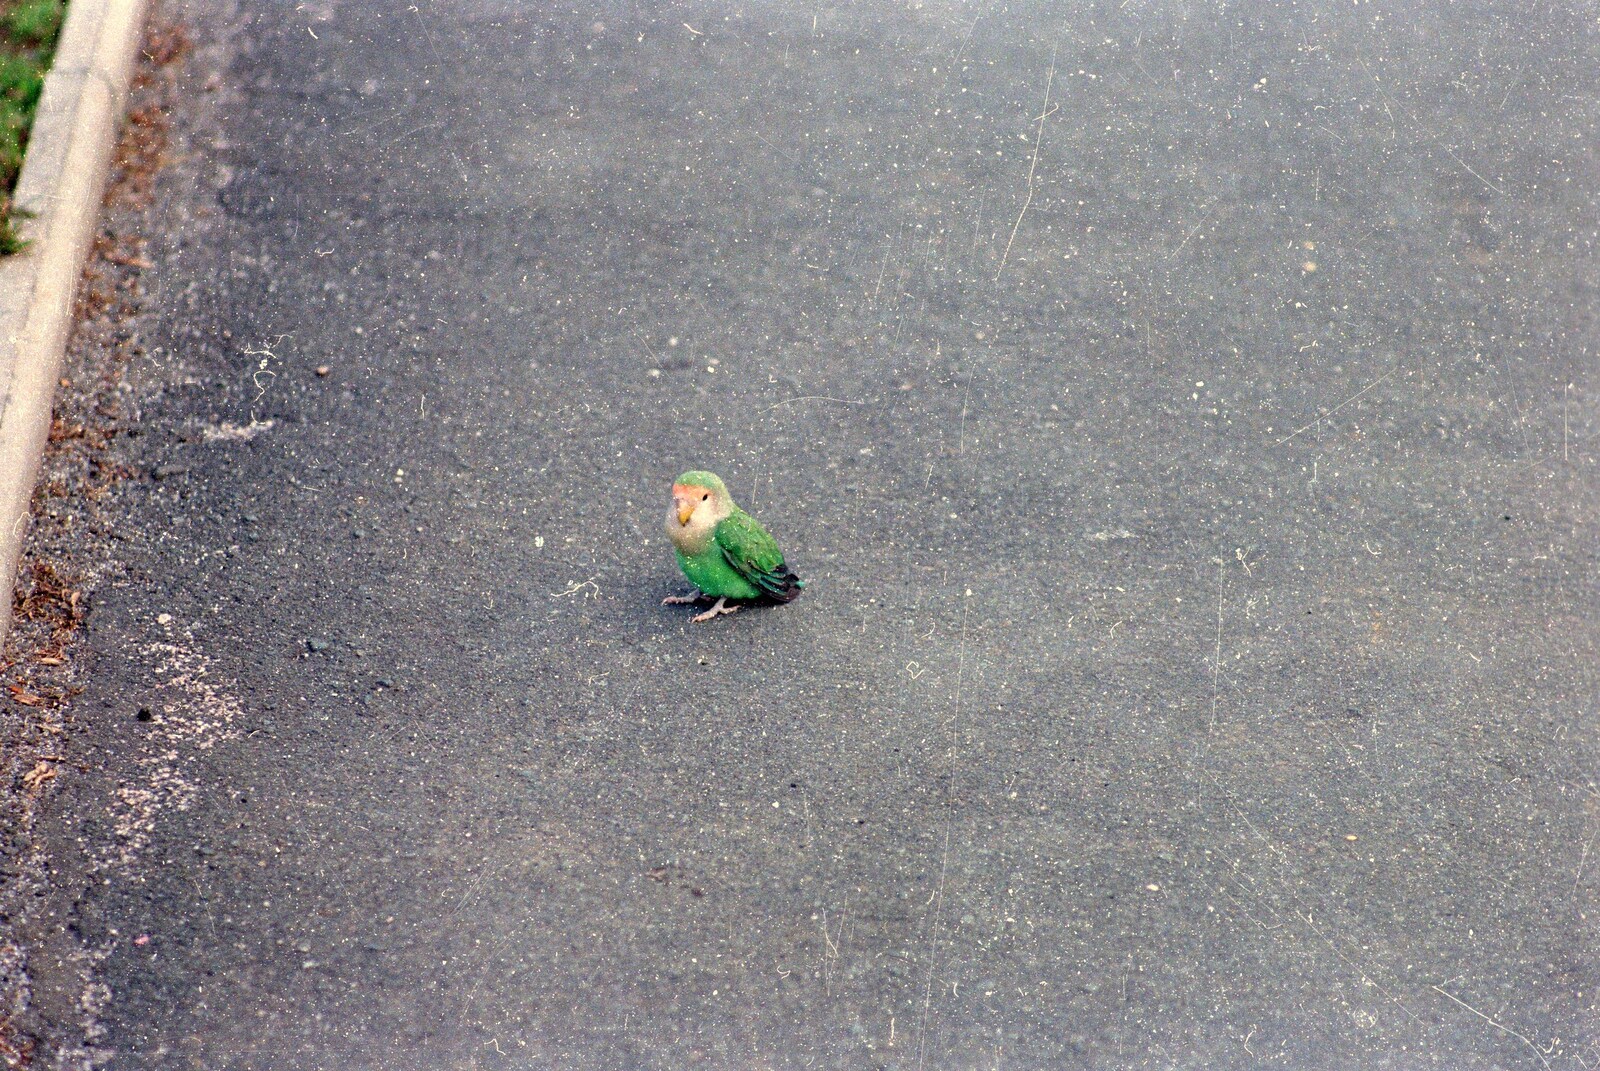 A random parakeet is spotted somewhere from Uni: A Neath Road Summer, St. Jude's, Plymouth - 18th August 1987